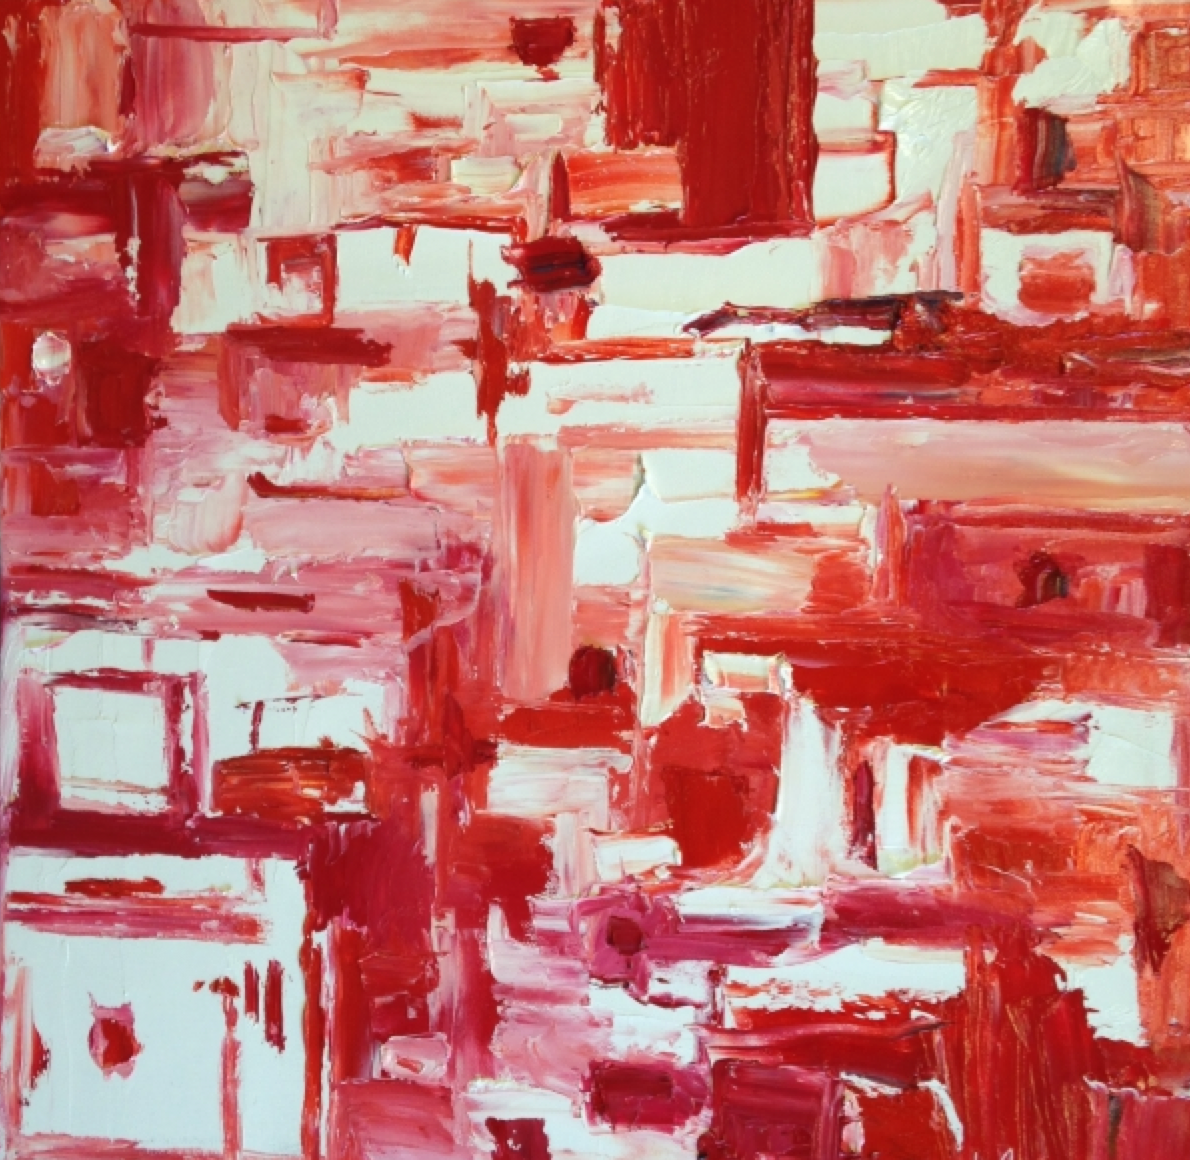  # 8  Red and White  by Jodie Maurer  24" x 24" | Oil | $1,400.00     Status: Available  Current Location:  C. Parker Gallery  